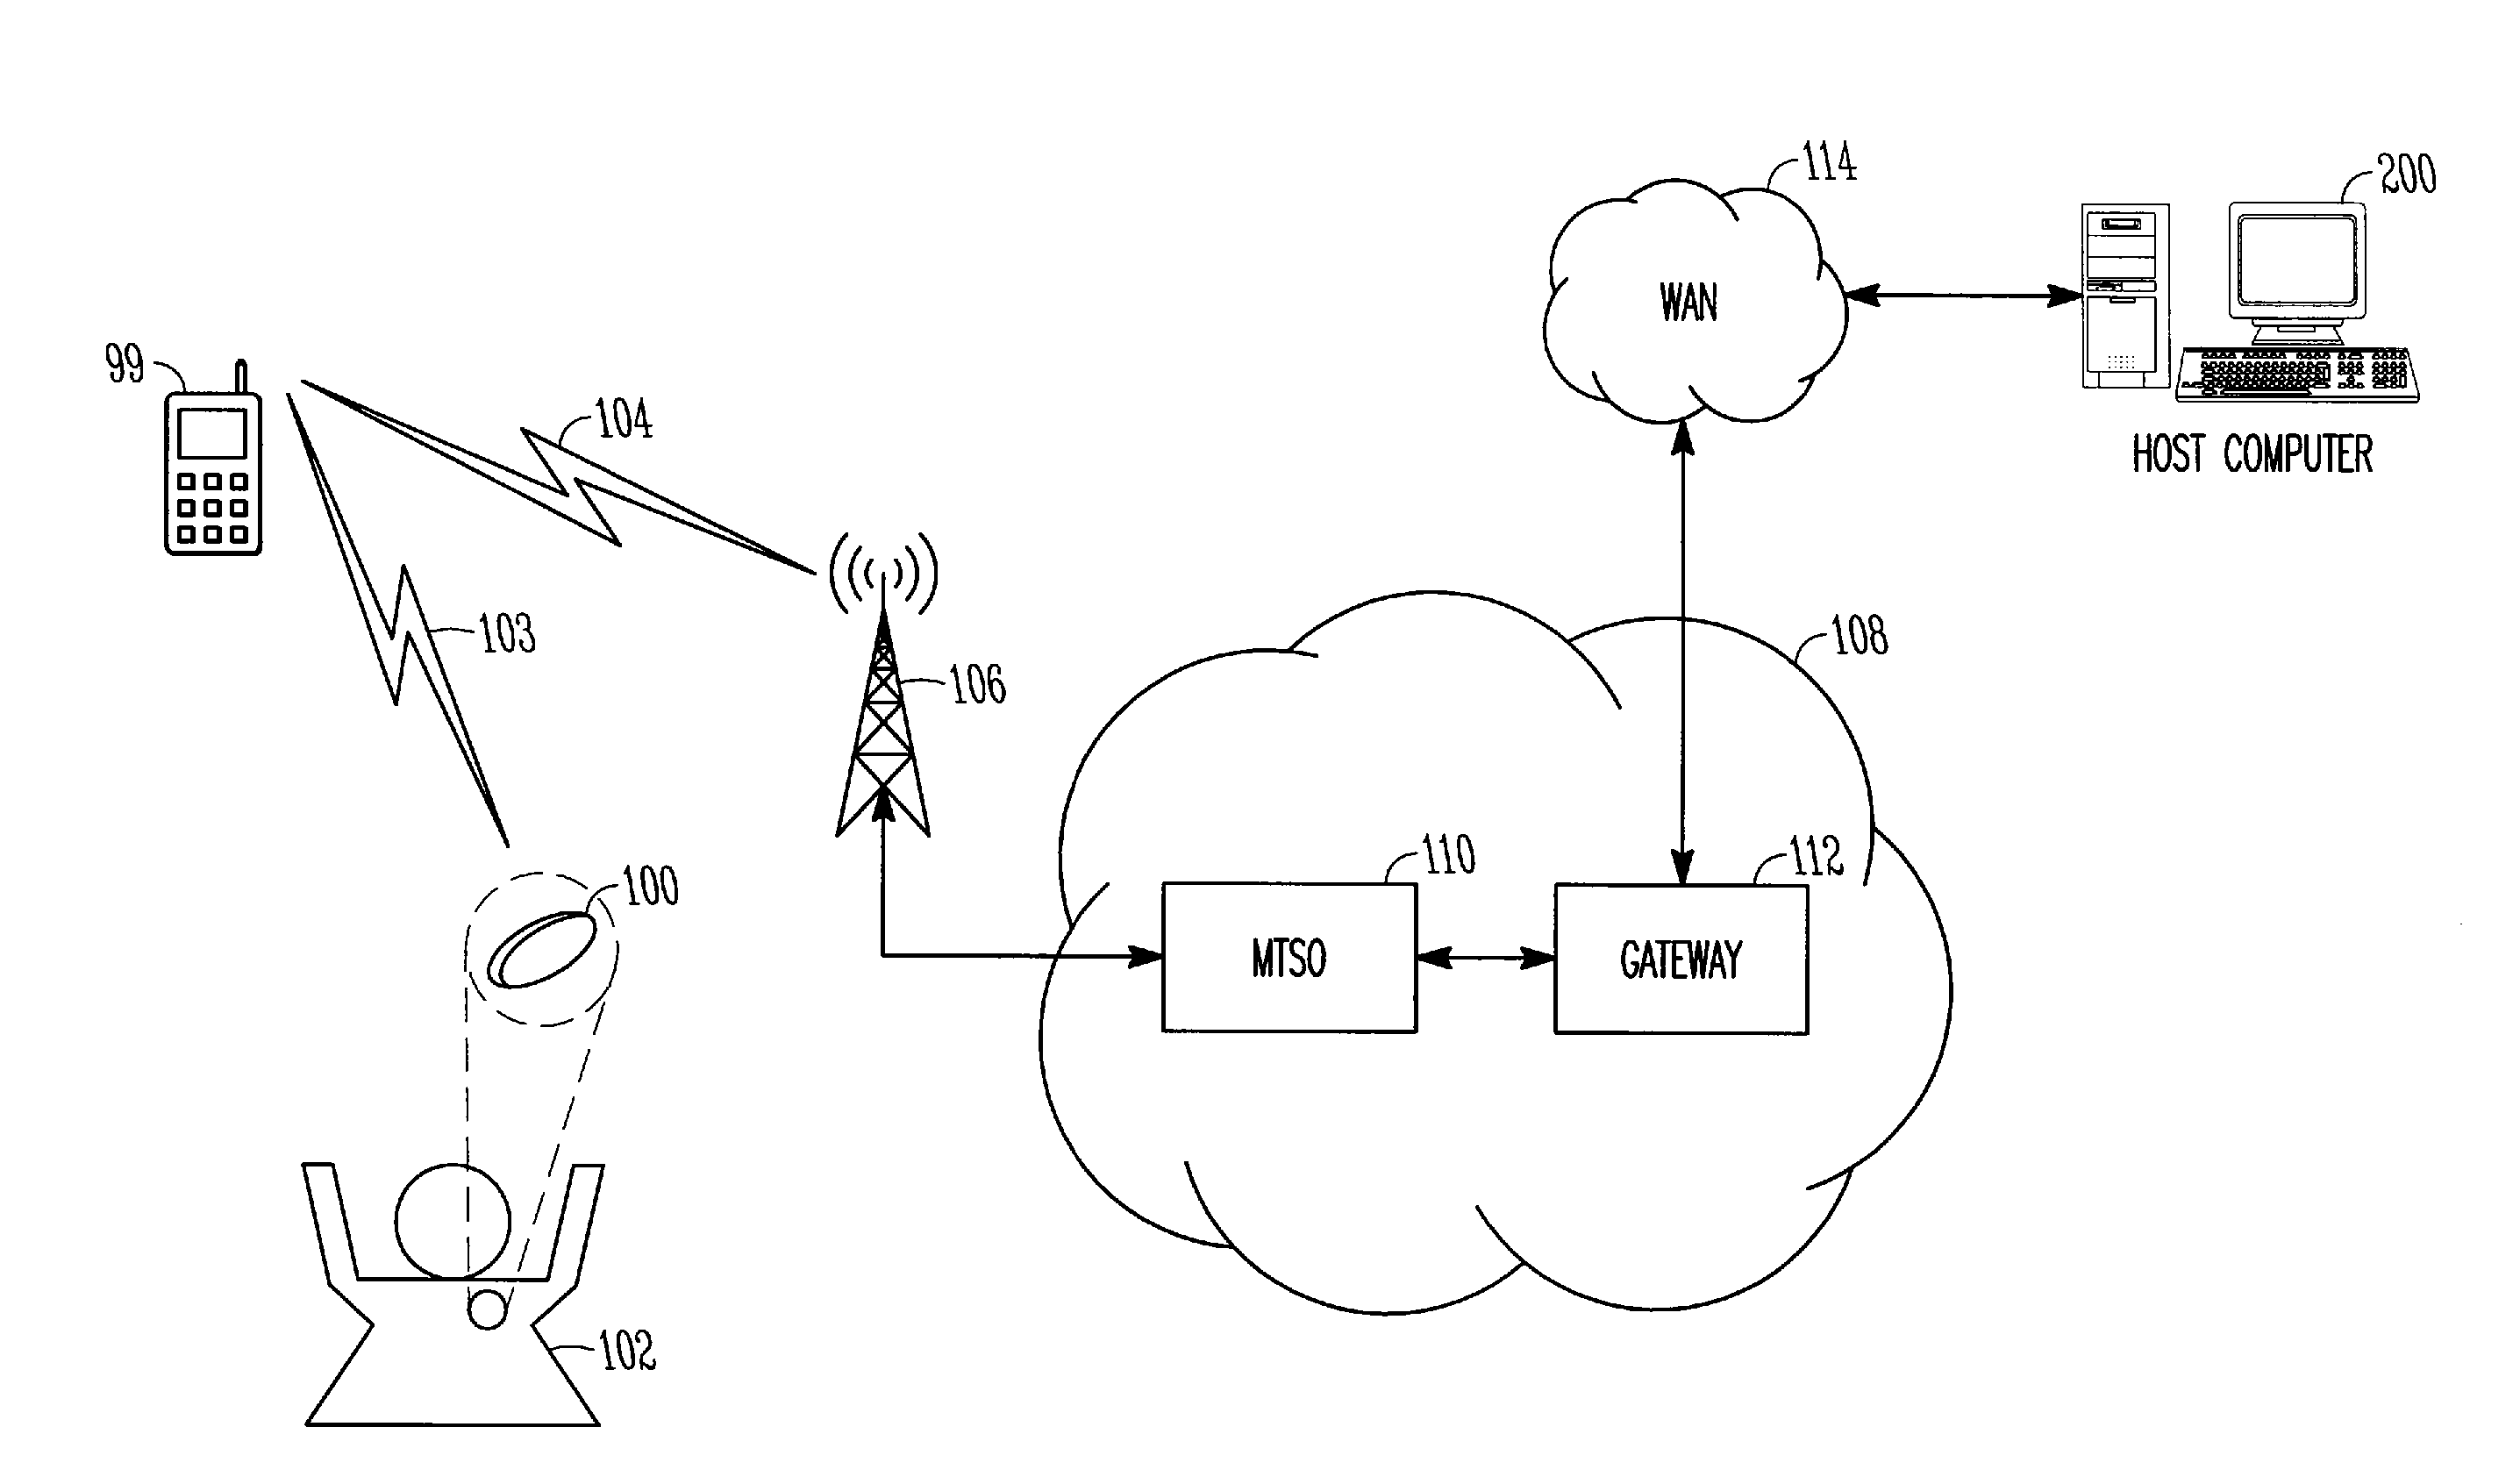 Method and apparatus for enabling data communication between an implantable medical device and a patient management system